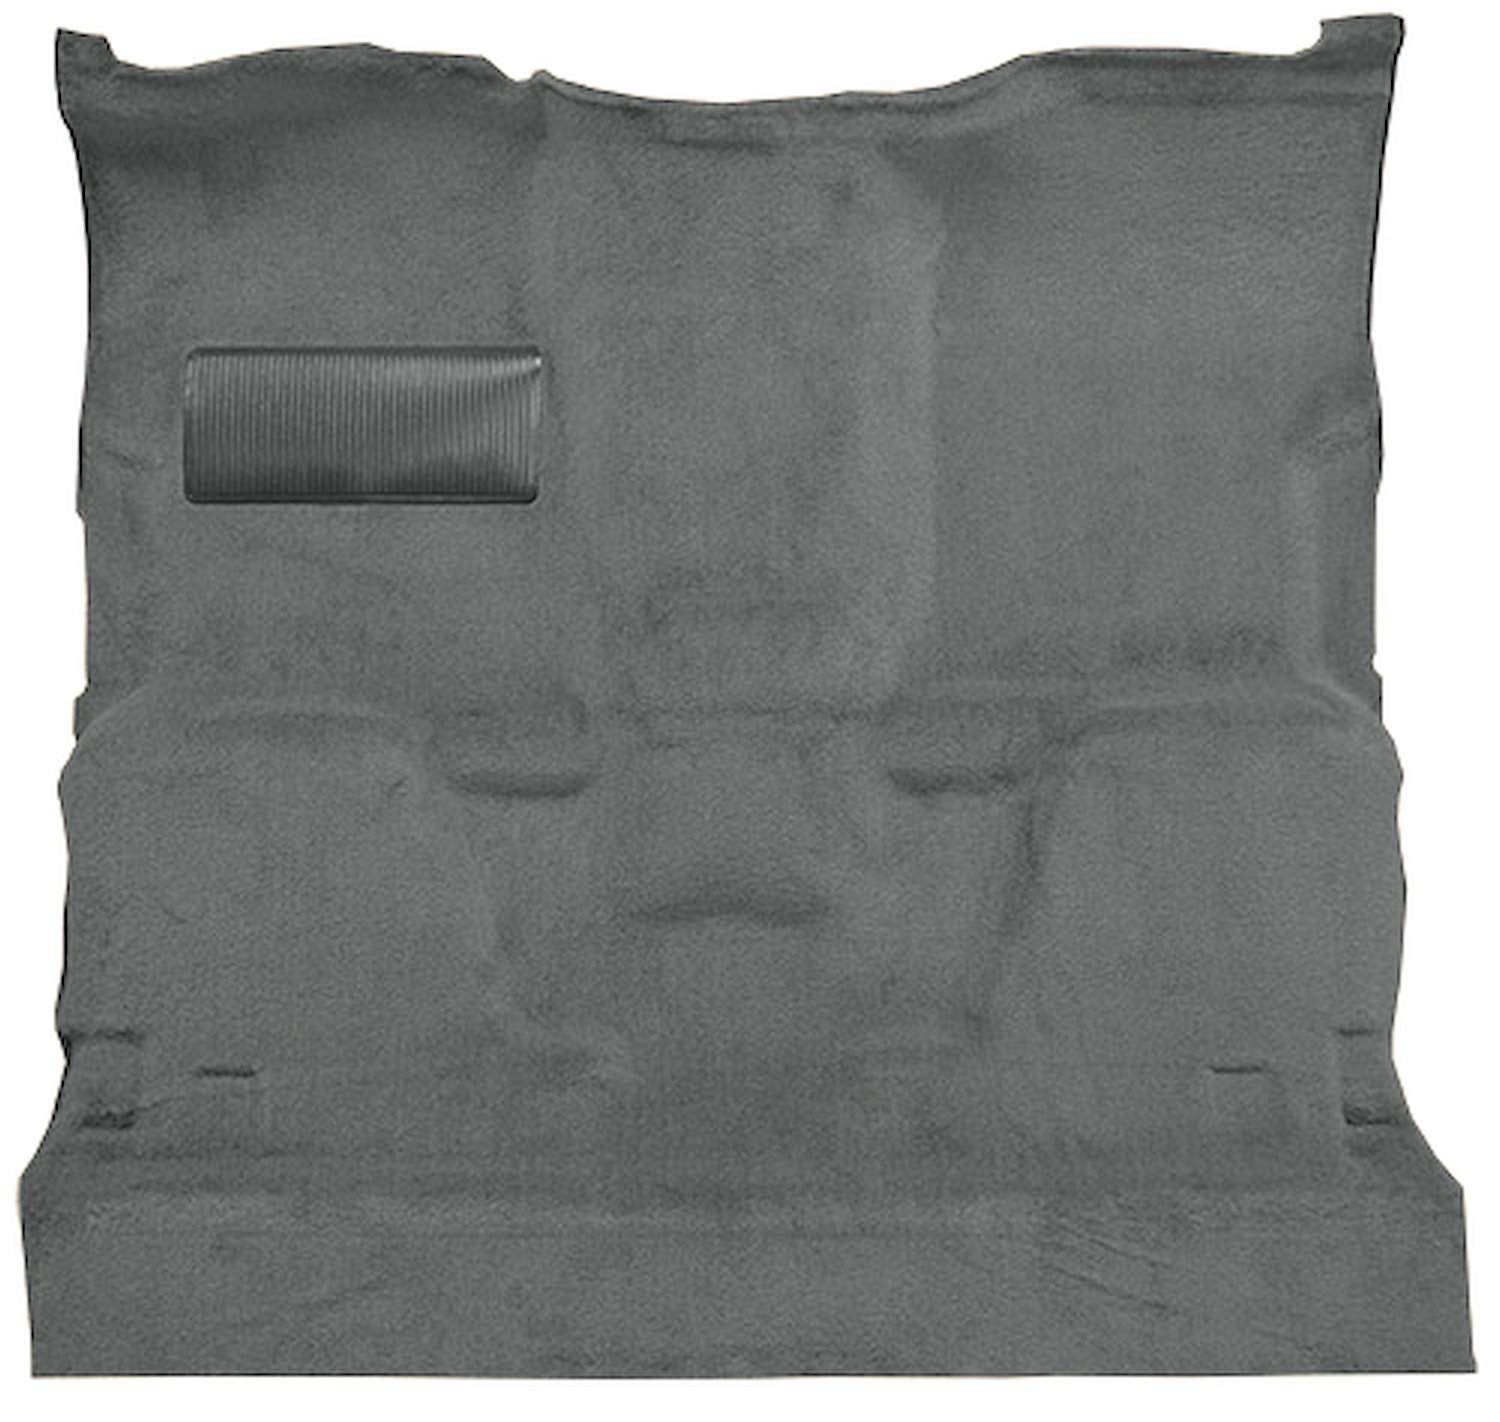 Molded Cut Pile Carpet for 1987 Chevrolet/GMC R Series Truck [Mass Backing, 1-Piece, Dove Gray]